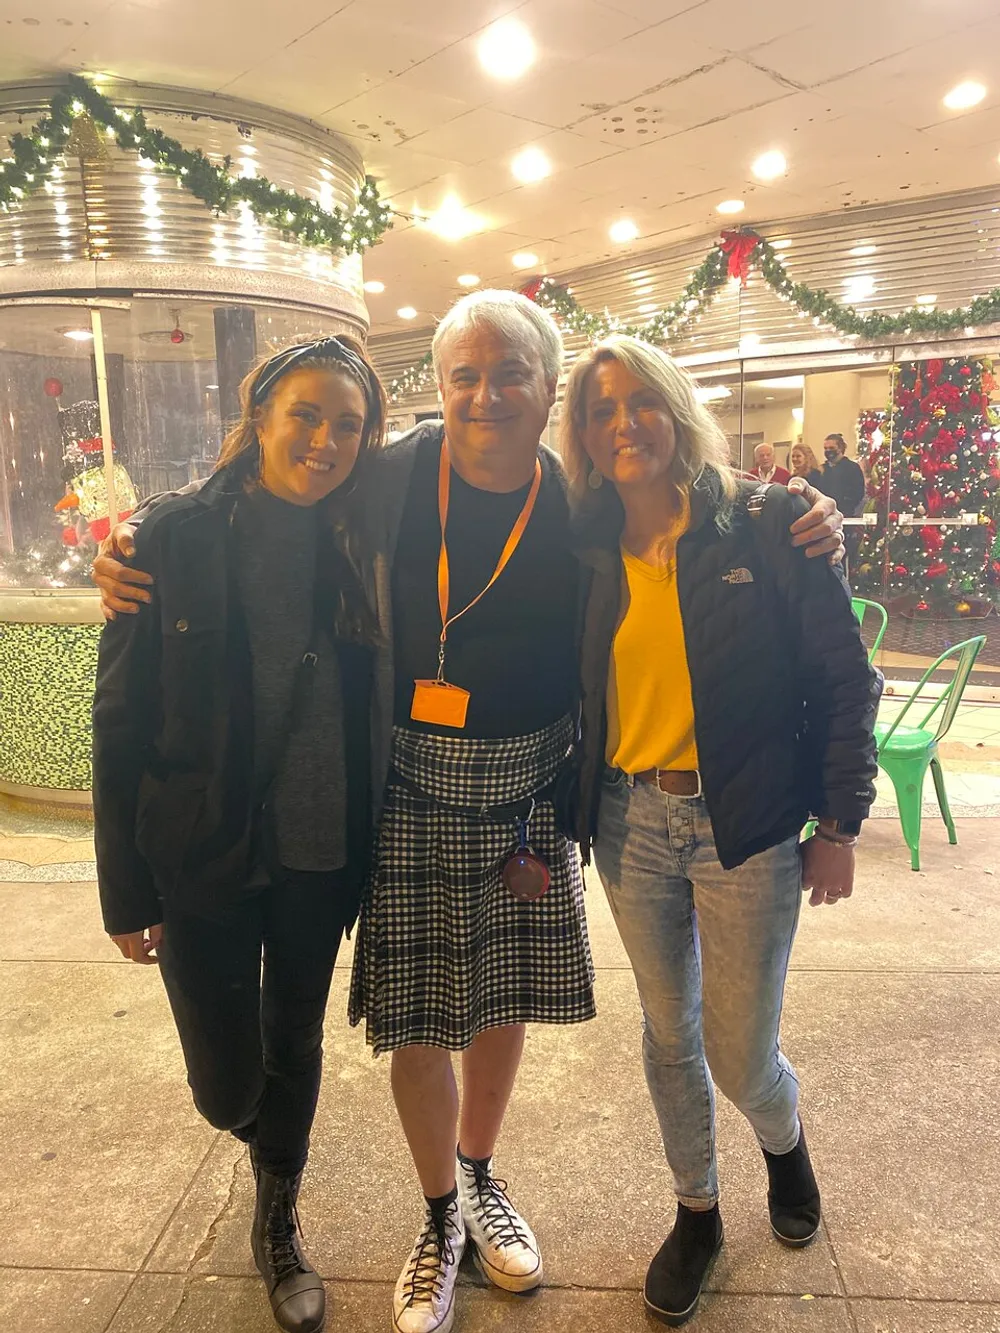 Three people are smiling for a photo together with festive decorations in the background